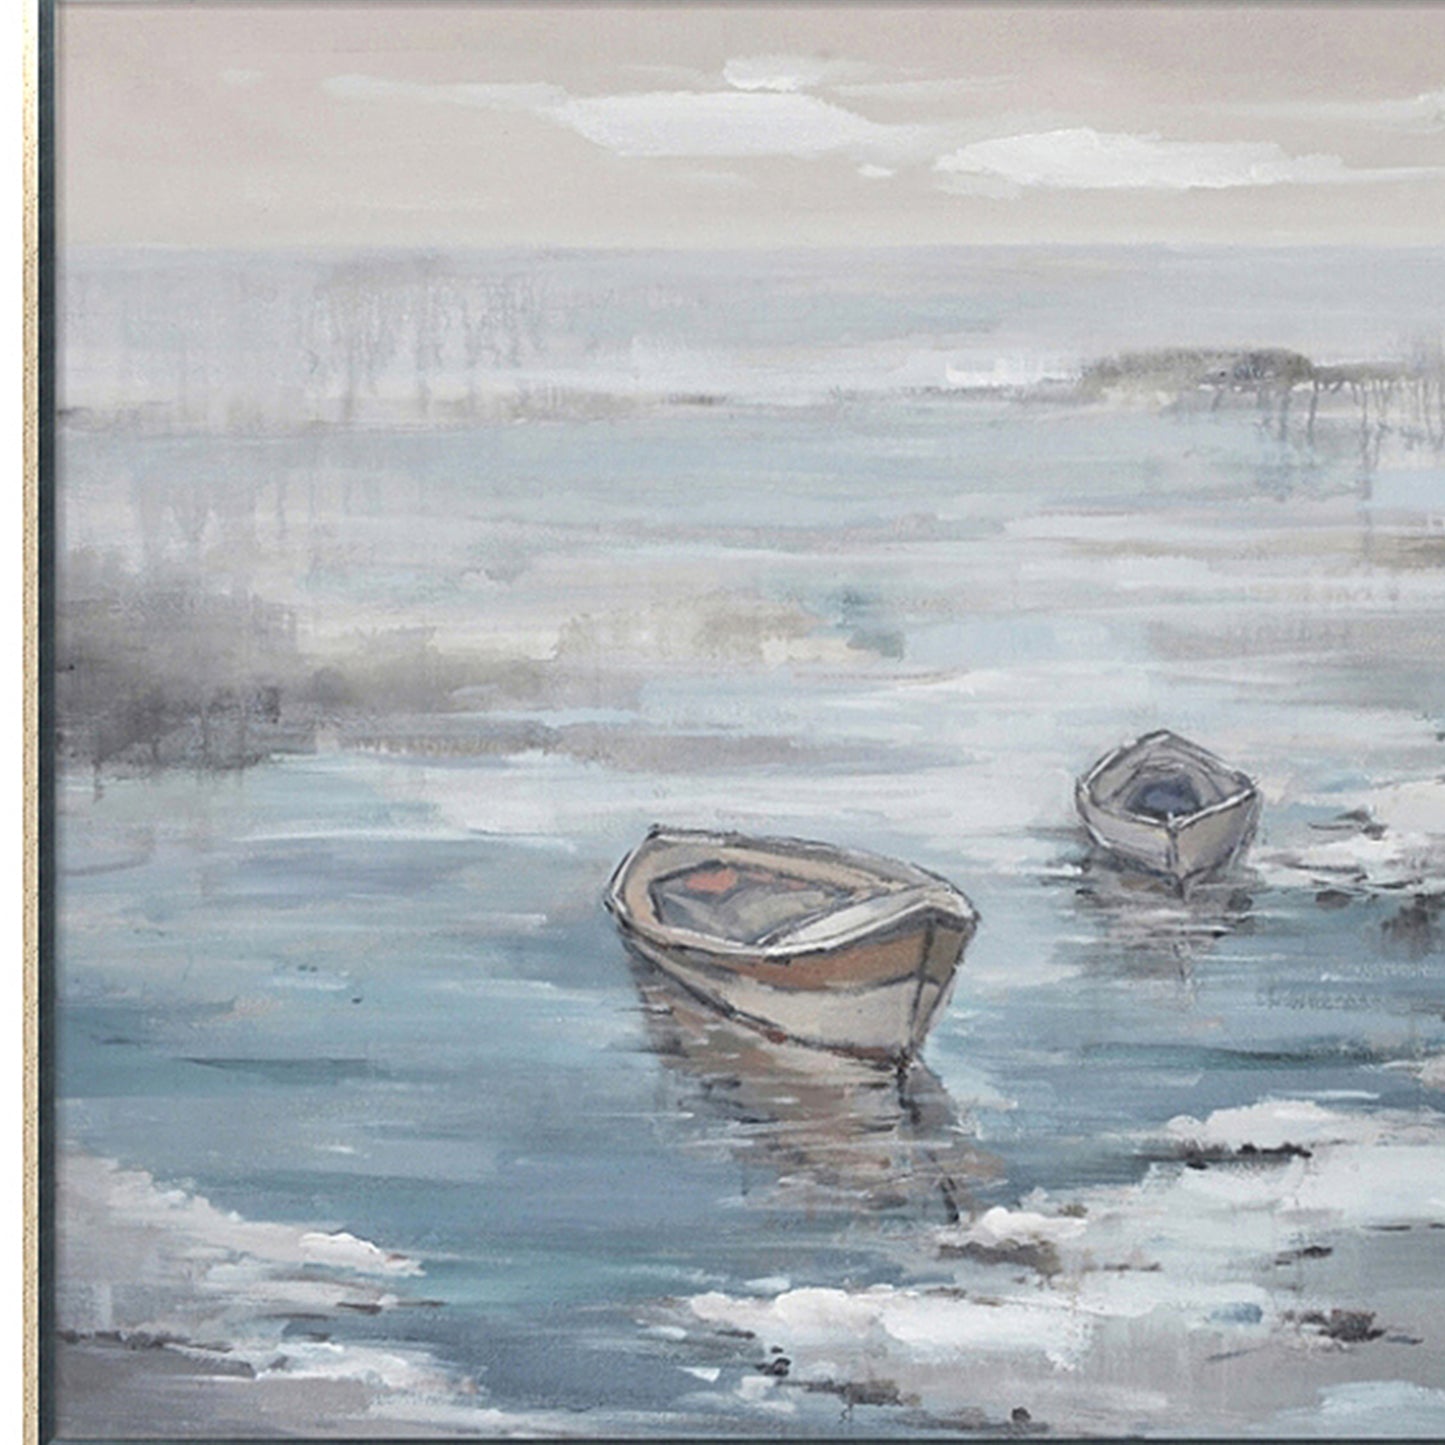 Hand Painted Acrylic Wall Art Ocean with Boats on a 47 x 35 Rectangular Canvas with a Silver Wooden Frame